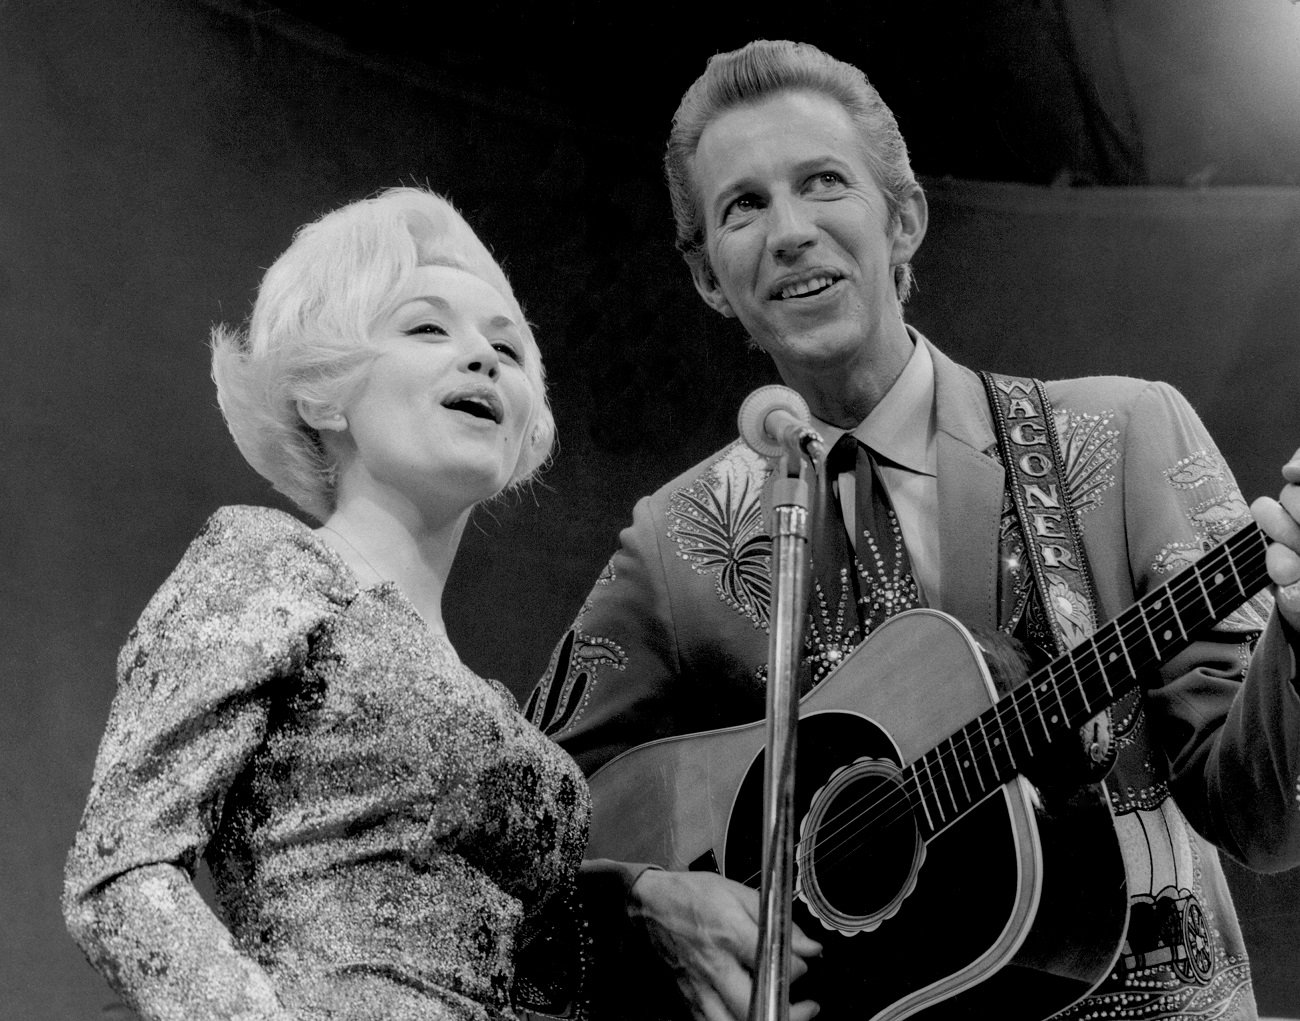 Dolly Parton wears a dress and Porter Wagoner holds a guitar. They stand in front of a microphone.